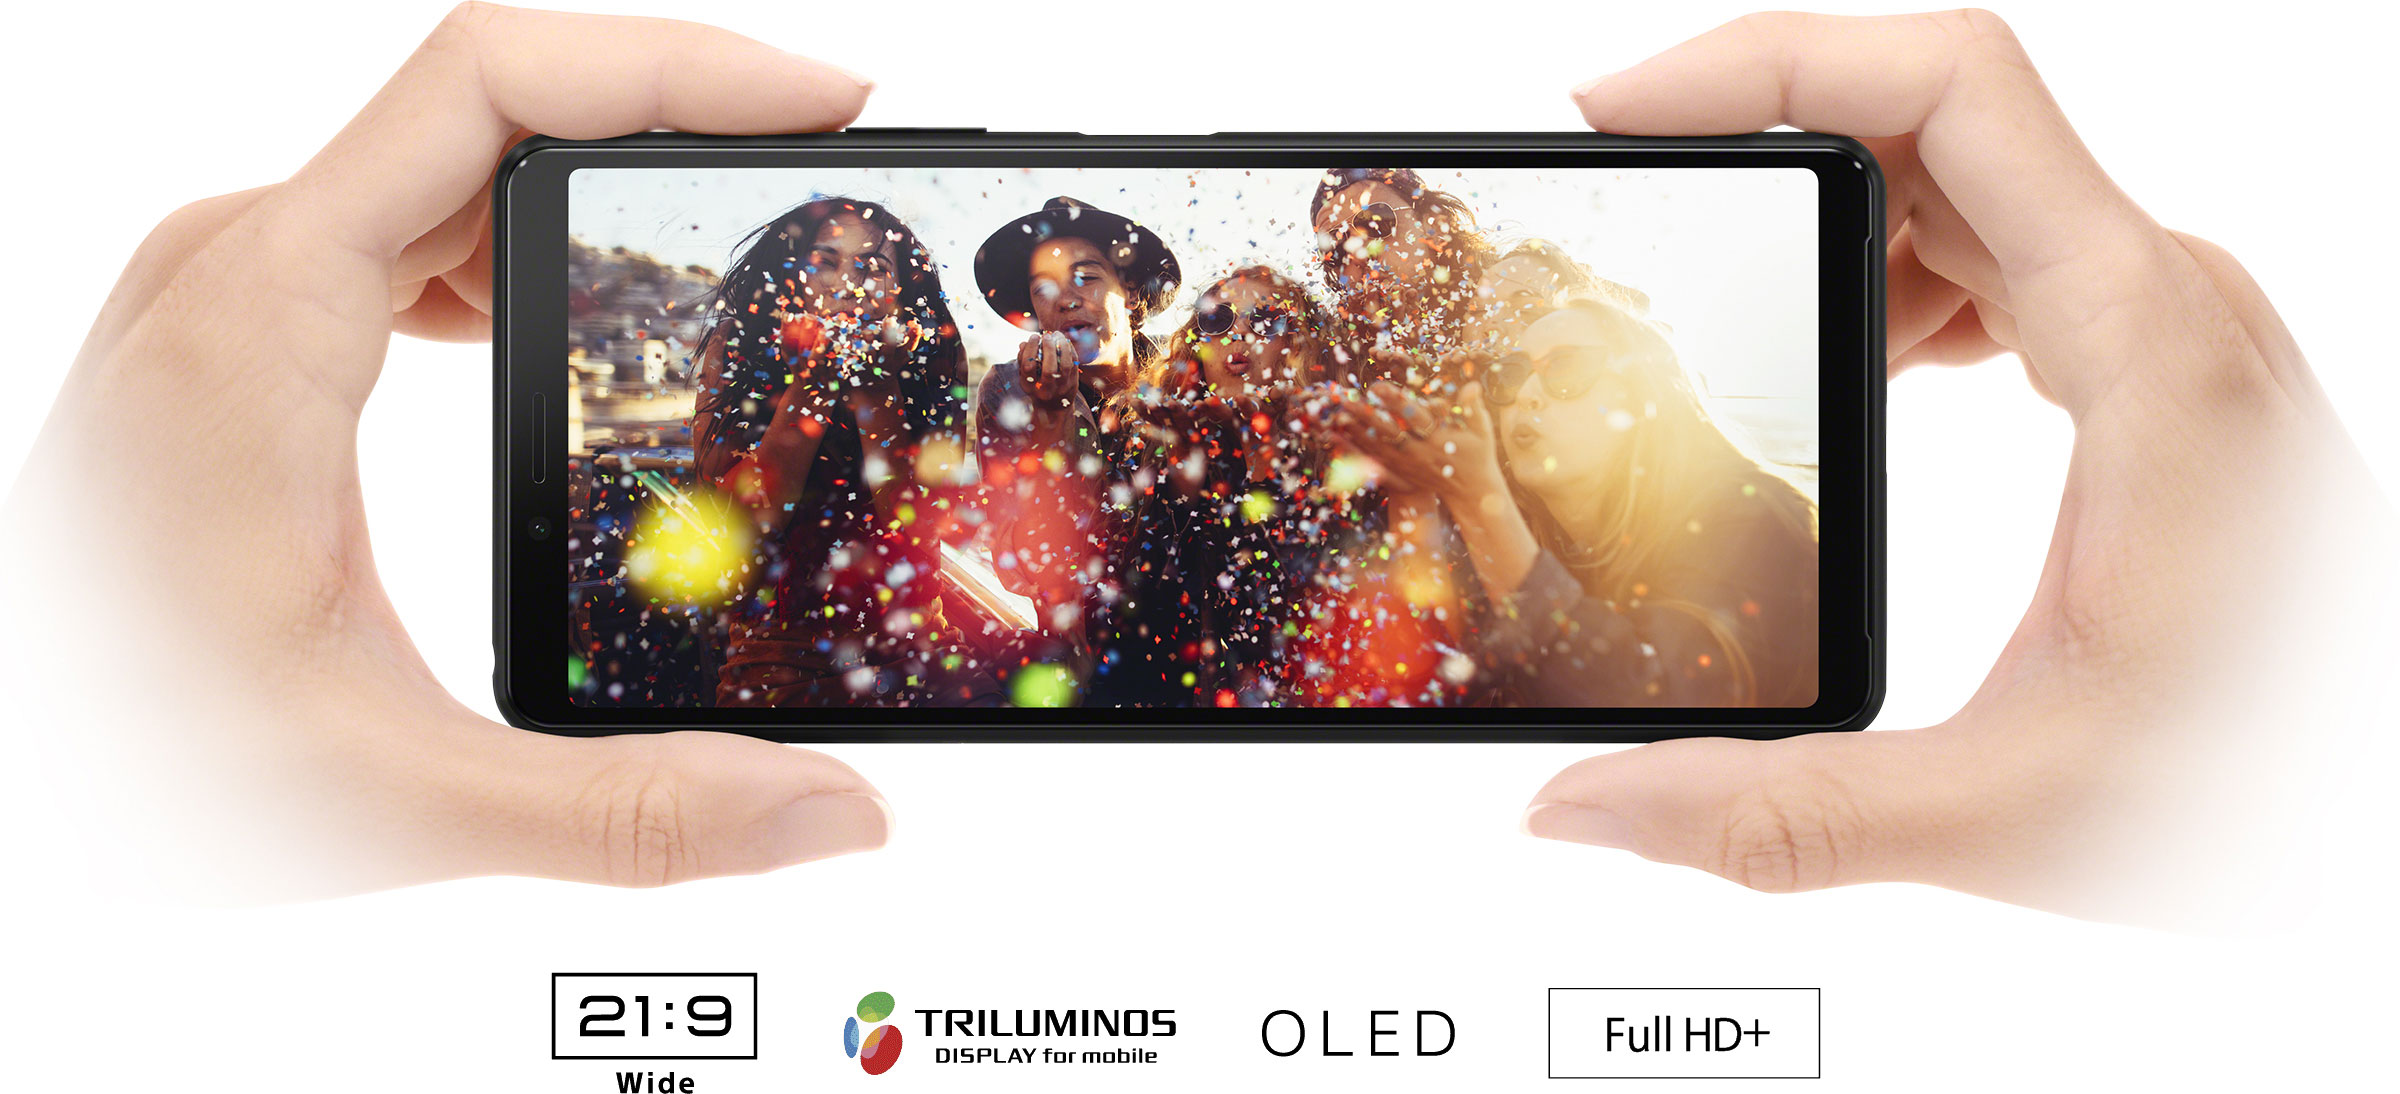 21:9 Wide、TRILUMINOS DISPLAY for mobile、OLED、Full HD+